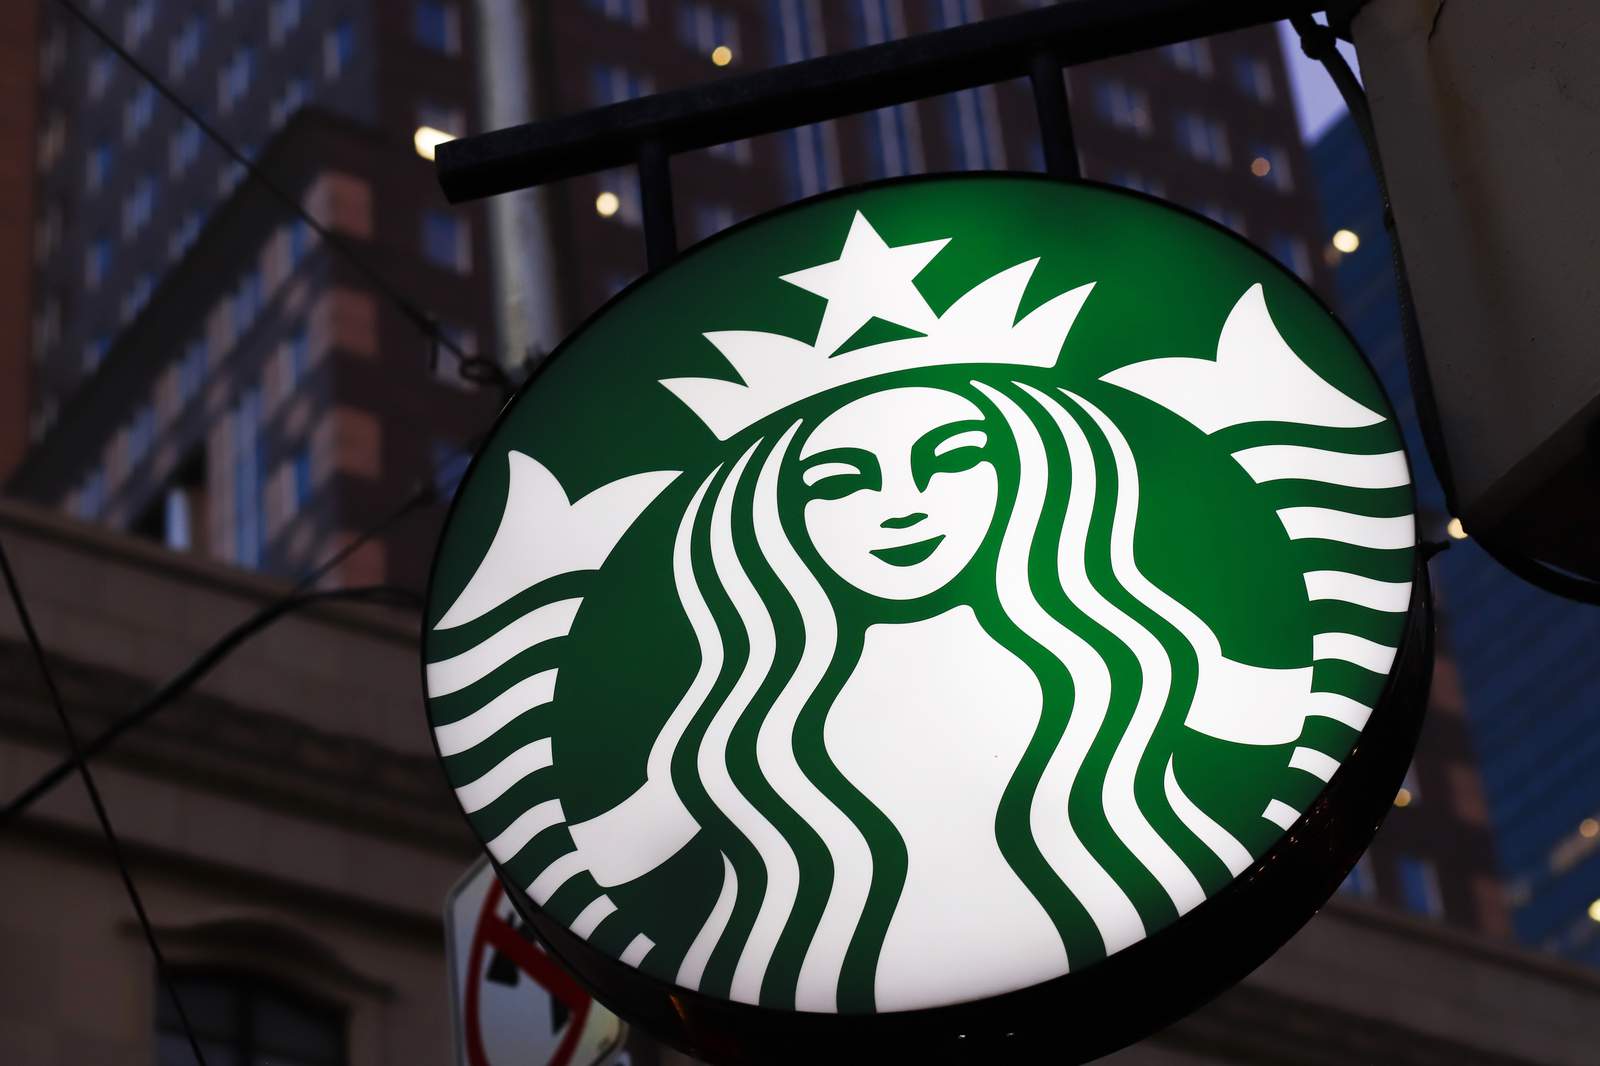 Starbucks is giving away a free cup of coffee to frontline workers now through Dec. 3…